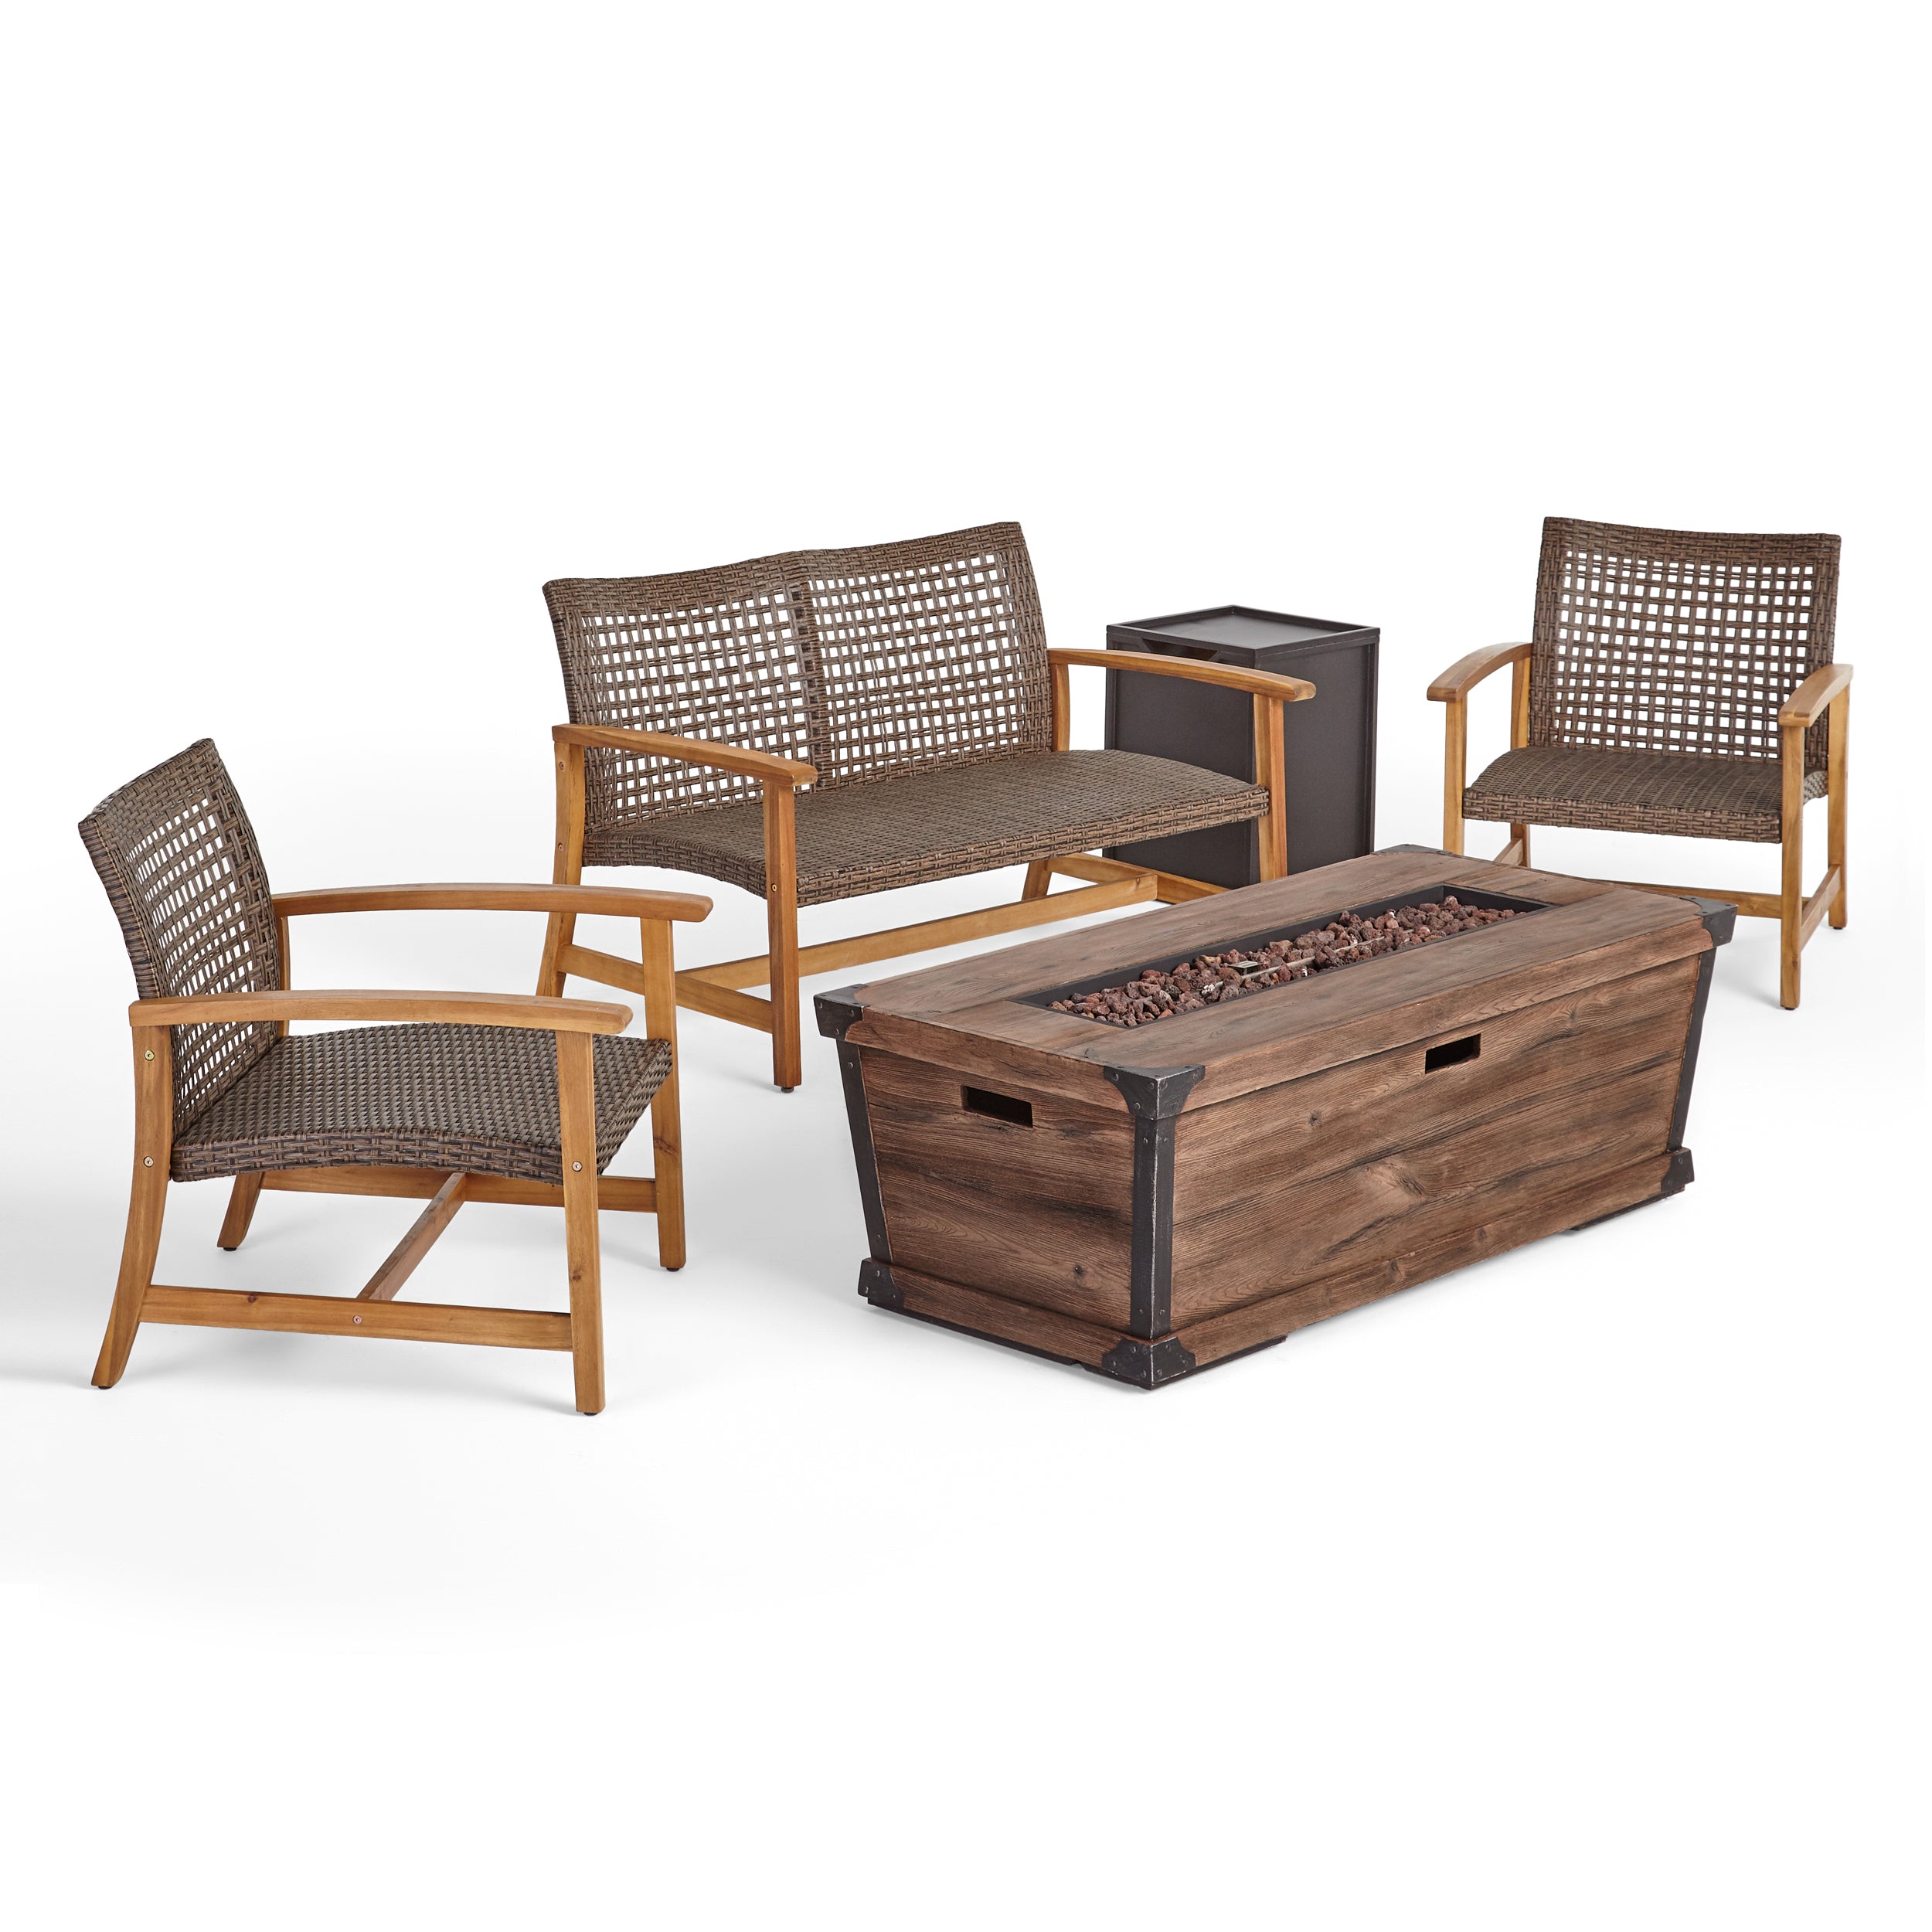 Airyanna Outdoor 3 Piece Wood and Wicker Chat Set with Fire Pit Natural Mixed Mocha